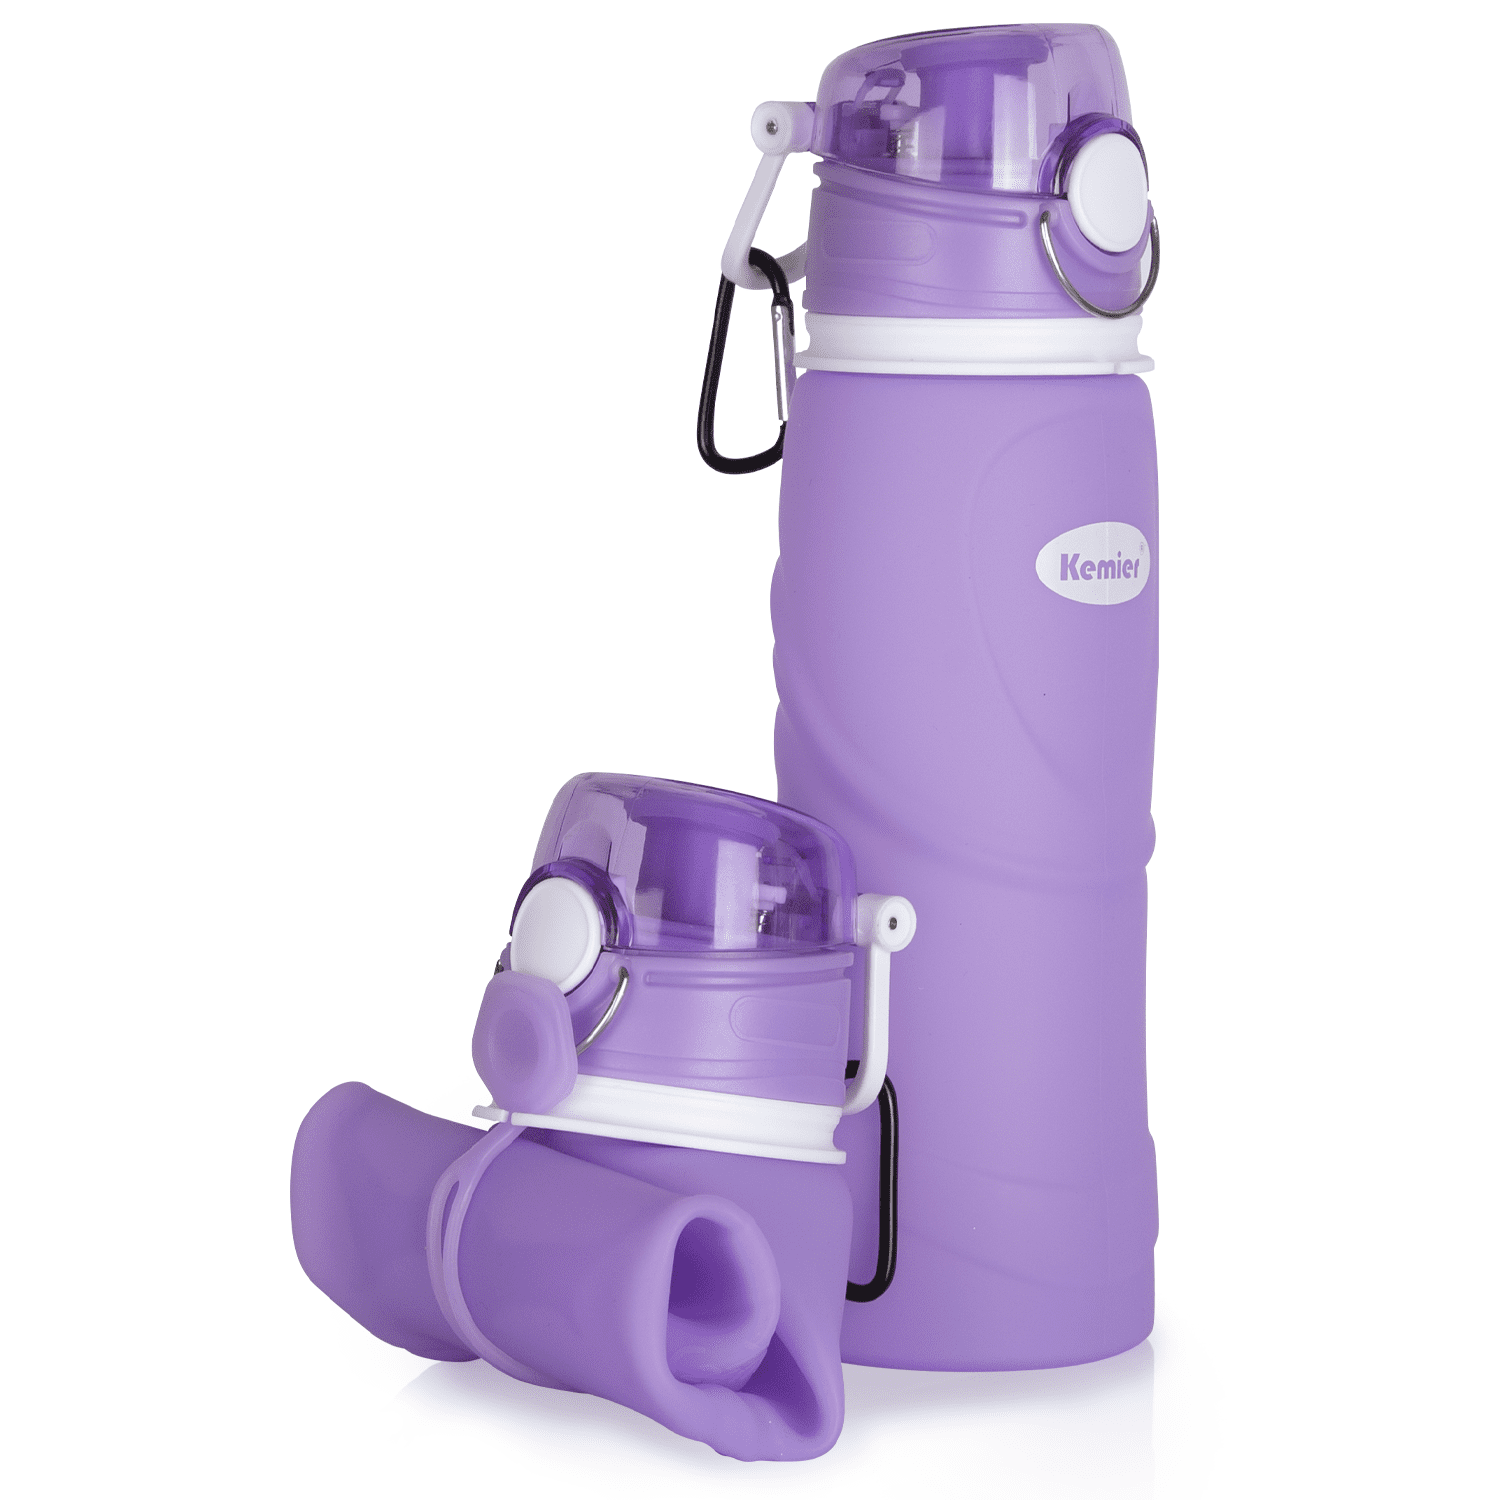 Luuttle Collapsible Travel Water Bottle Reusable Purple silicone Water  Bottles for Traveling Camping…See more Luuttle Collapsible Travel Water  Bottle